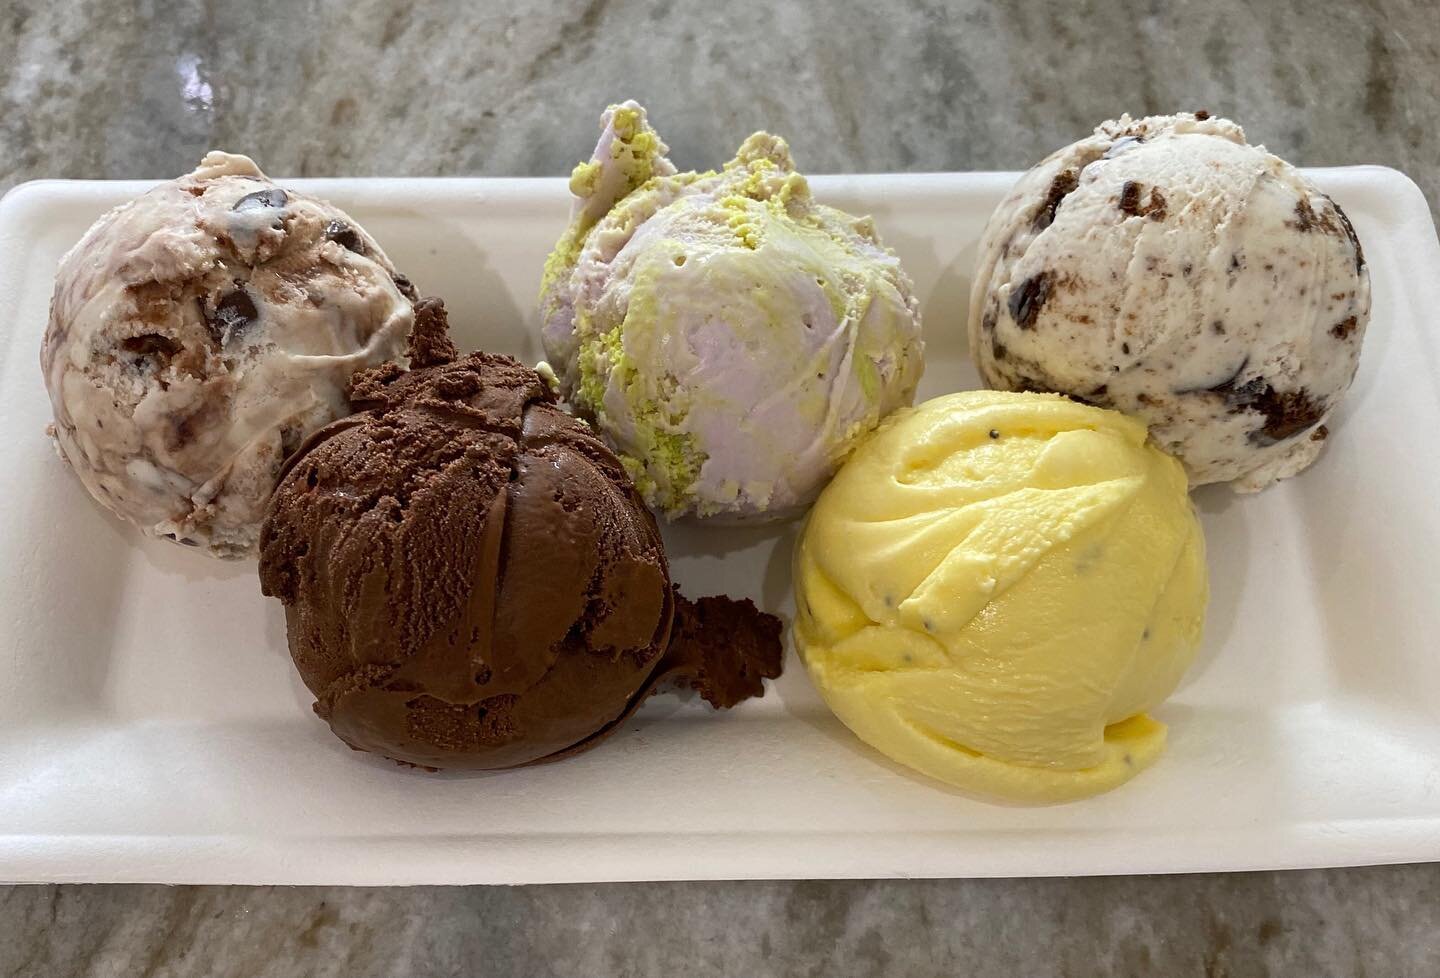 Did you know that we sell ice cream flights? This one is Vanilla with Fudge and Caramel Cups, Raspberry Chocolate, King Cake, Vegan Lemon Poppyseed, and Thin Mint.

#roserock #roserockmicrocreamery #tulsavegans